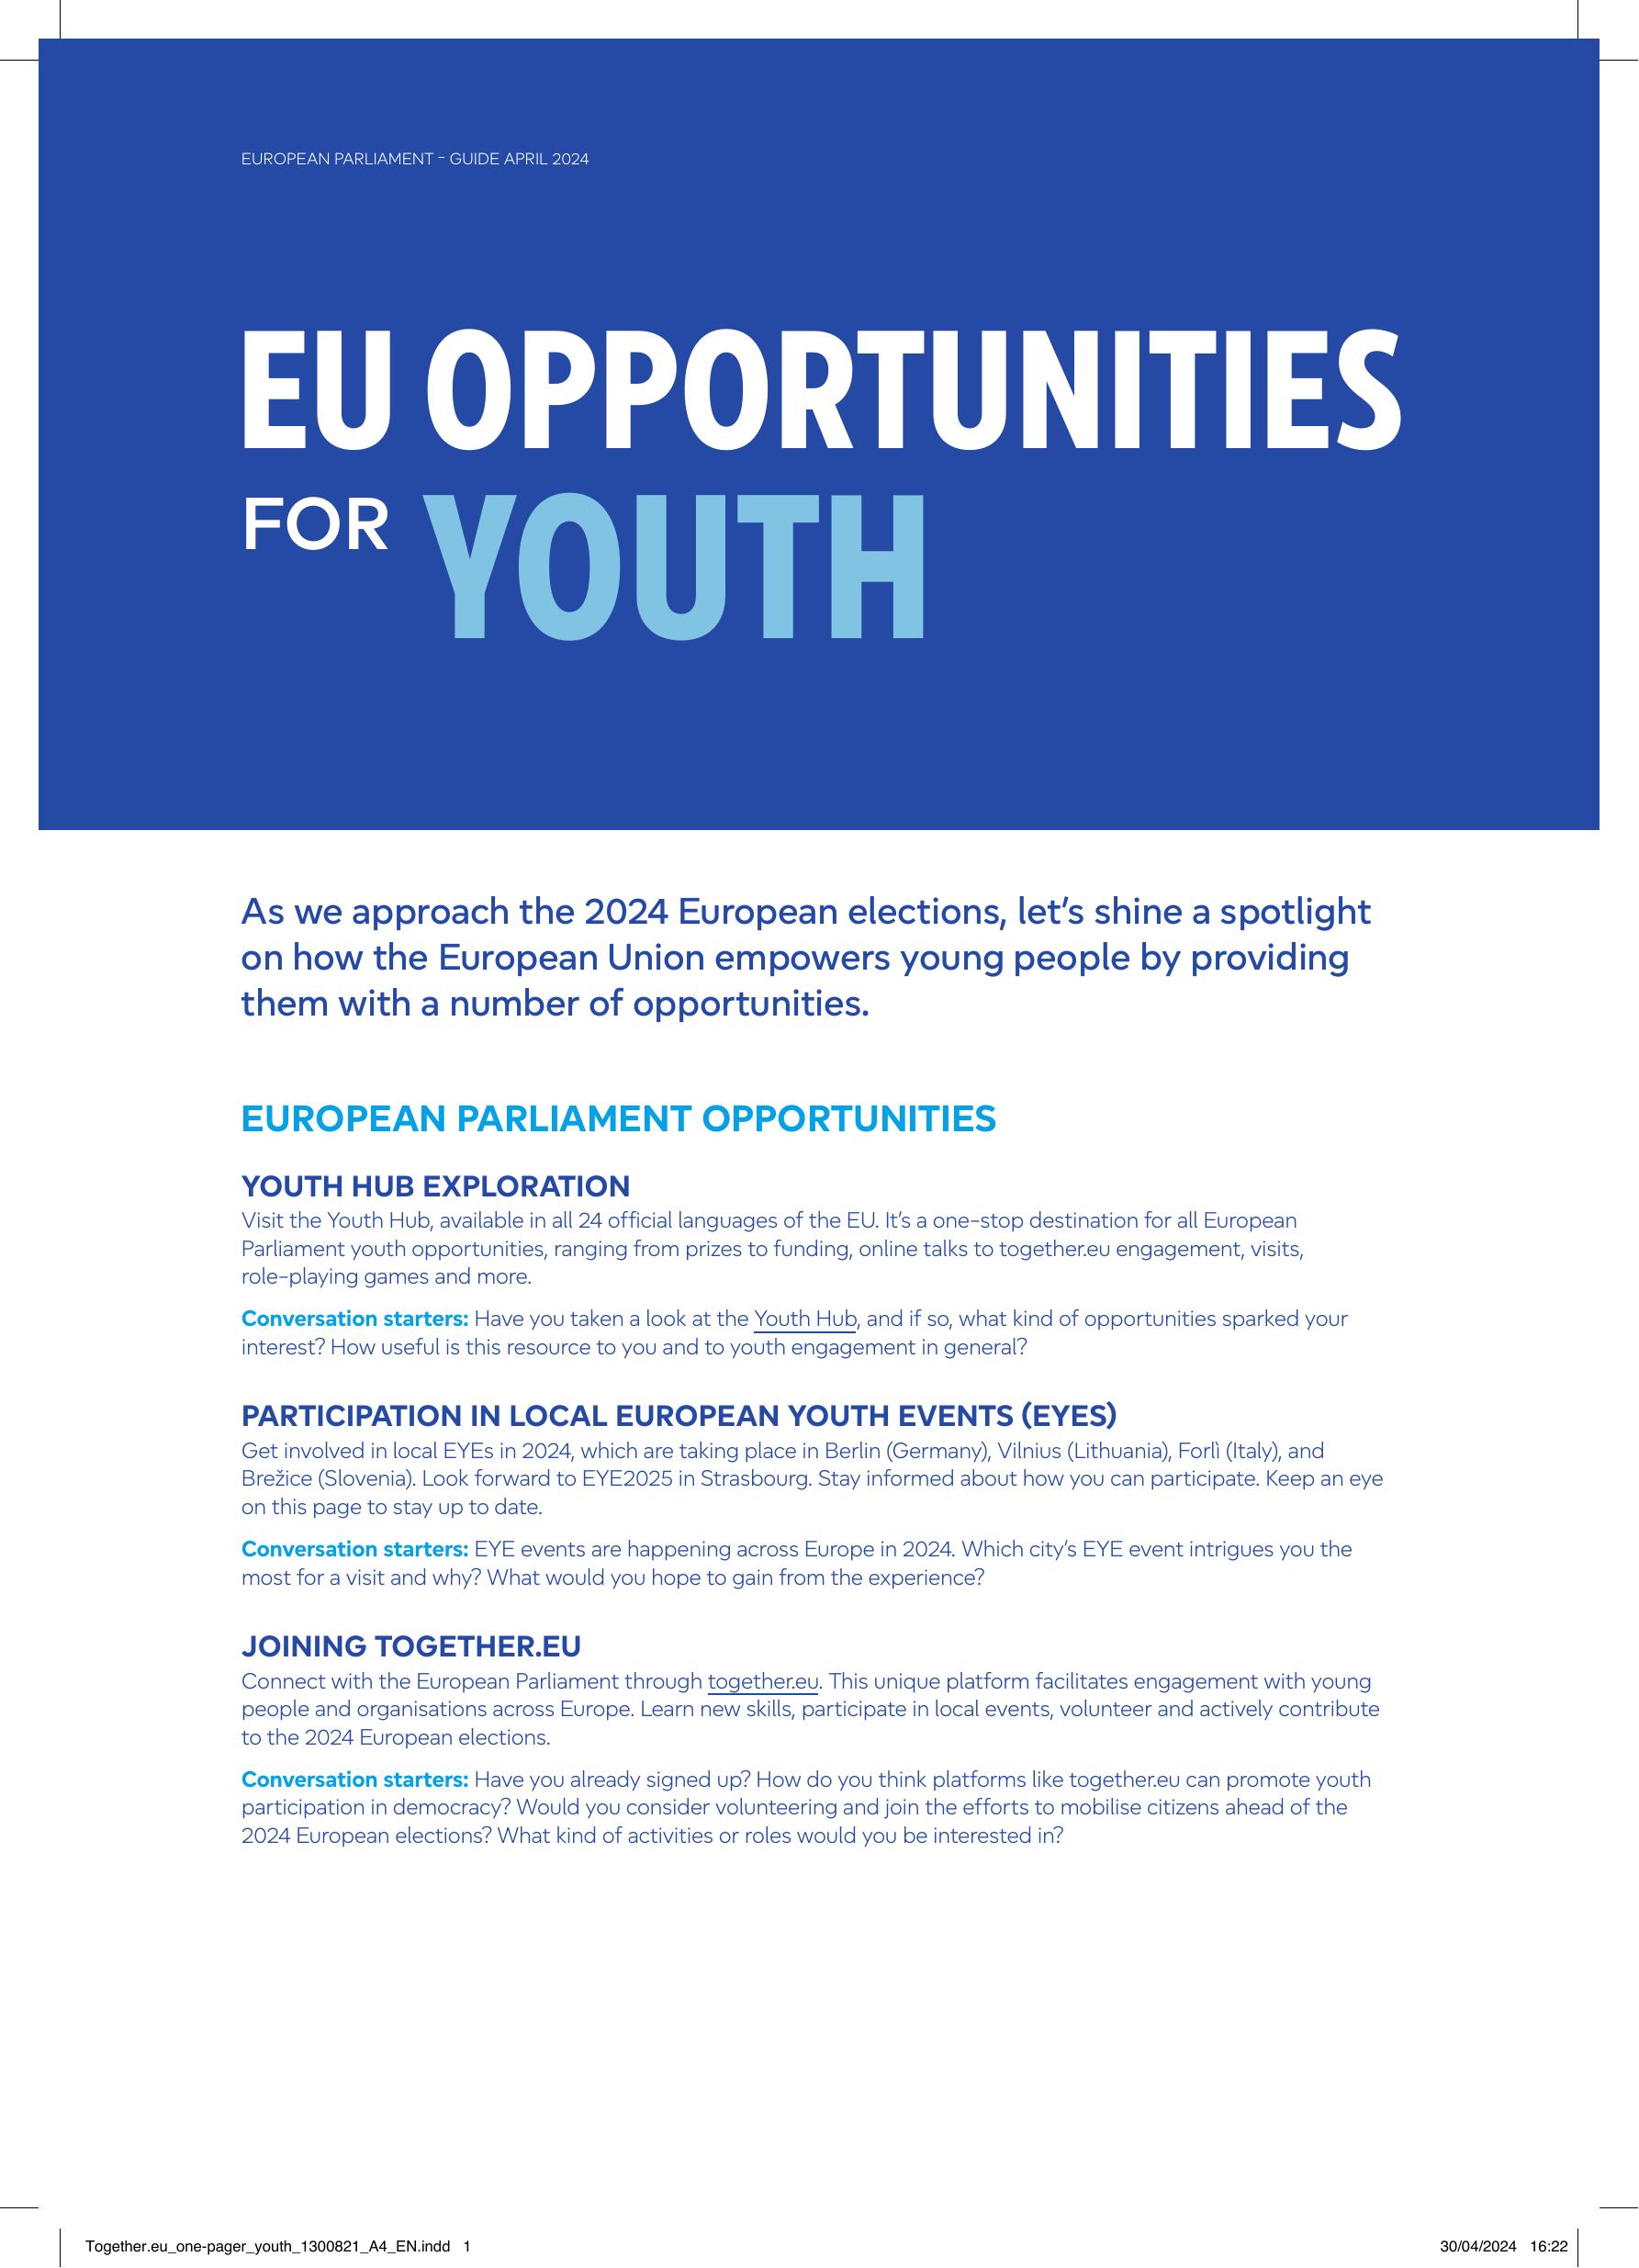 Together.eu_one-pager_youth_A4_EN_print.pdf